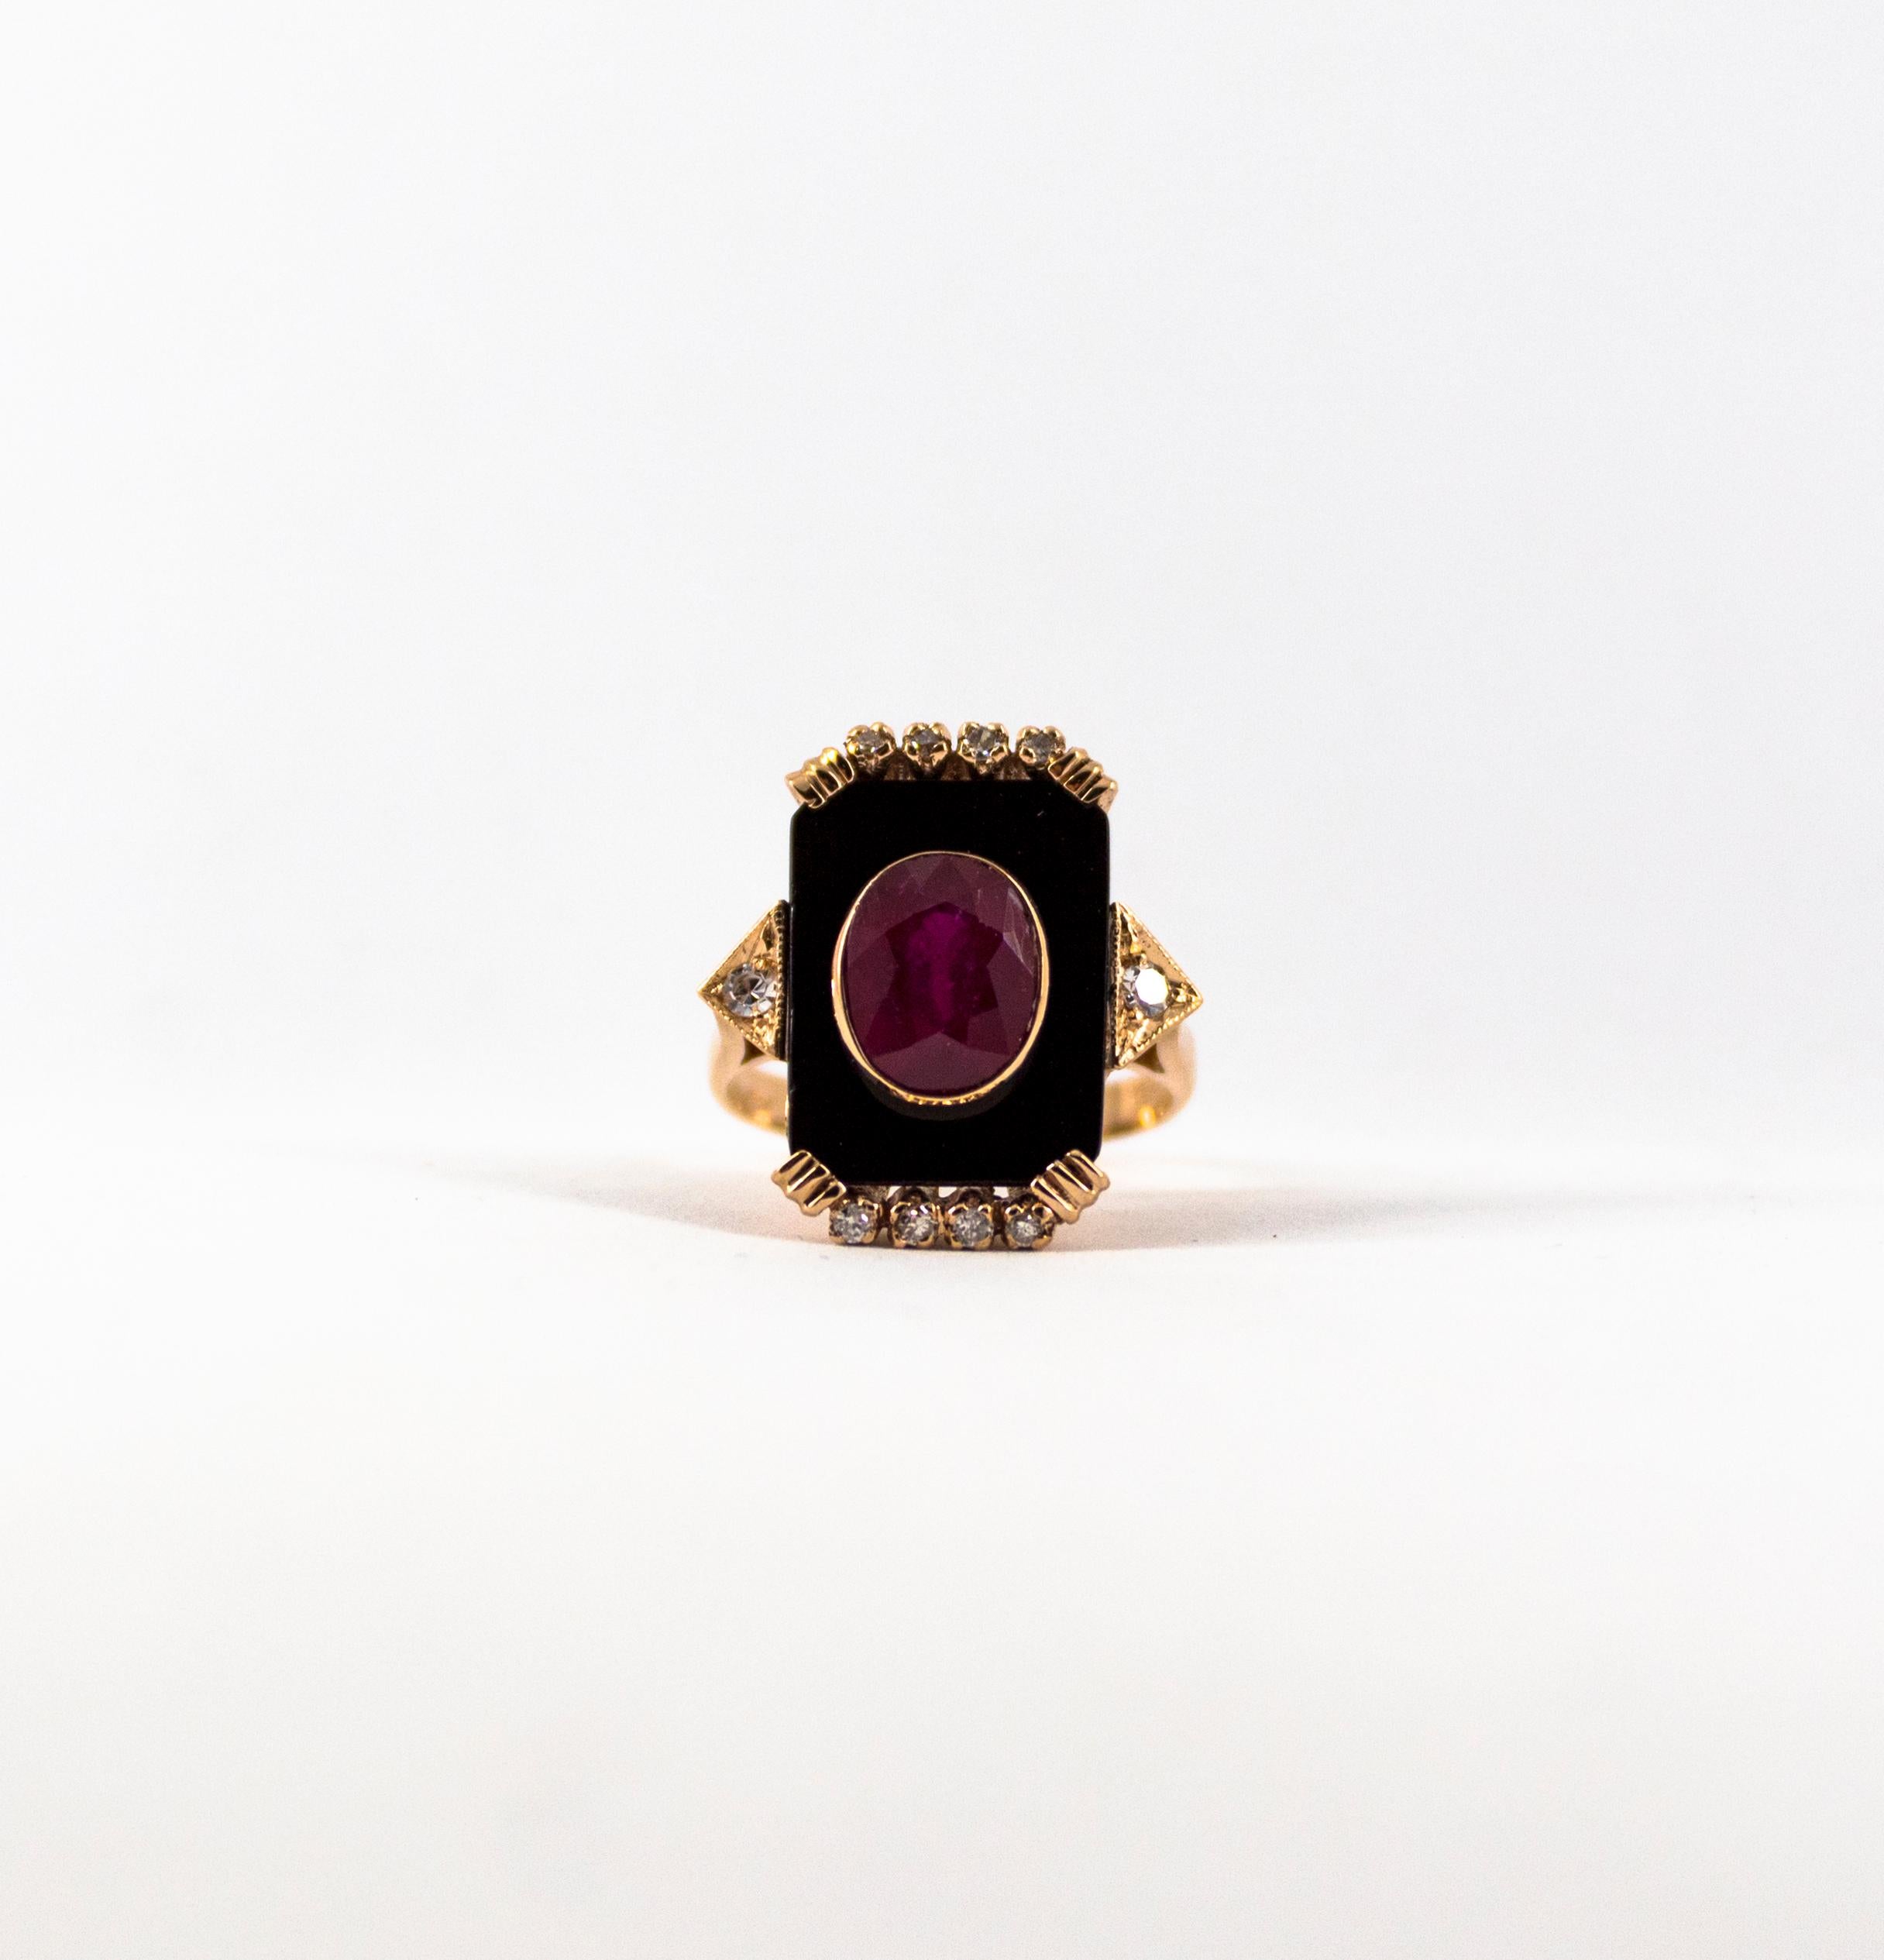 This Ring is made of 14K Yellow Gold.
This Ring has 0.18 Carats of White Diamonds.
This Ring has a 2.10 Carats Ruby.
This Ring has also Onyx.
Size ITA: 16 USA: 7 1/2
We're a workshop so every piece is handmade, customizable and resizable.